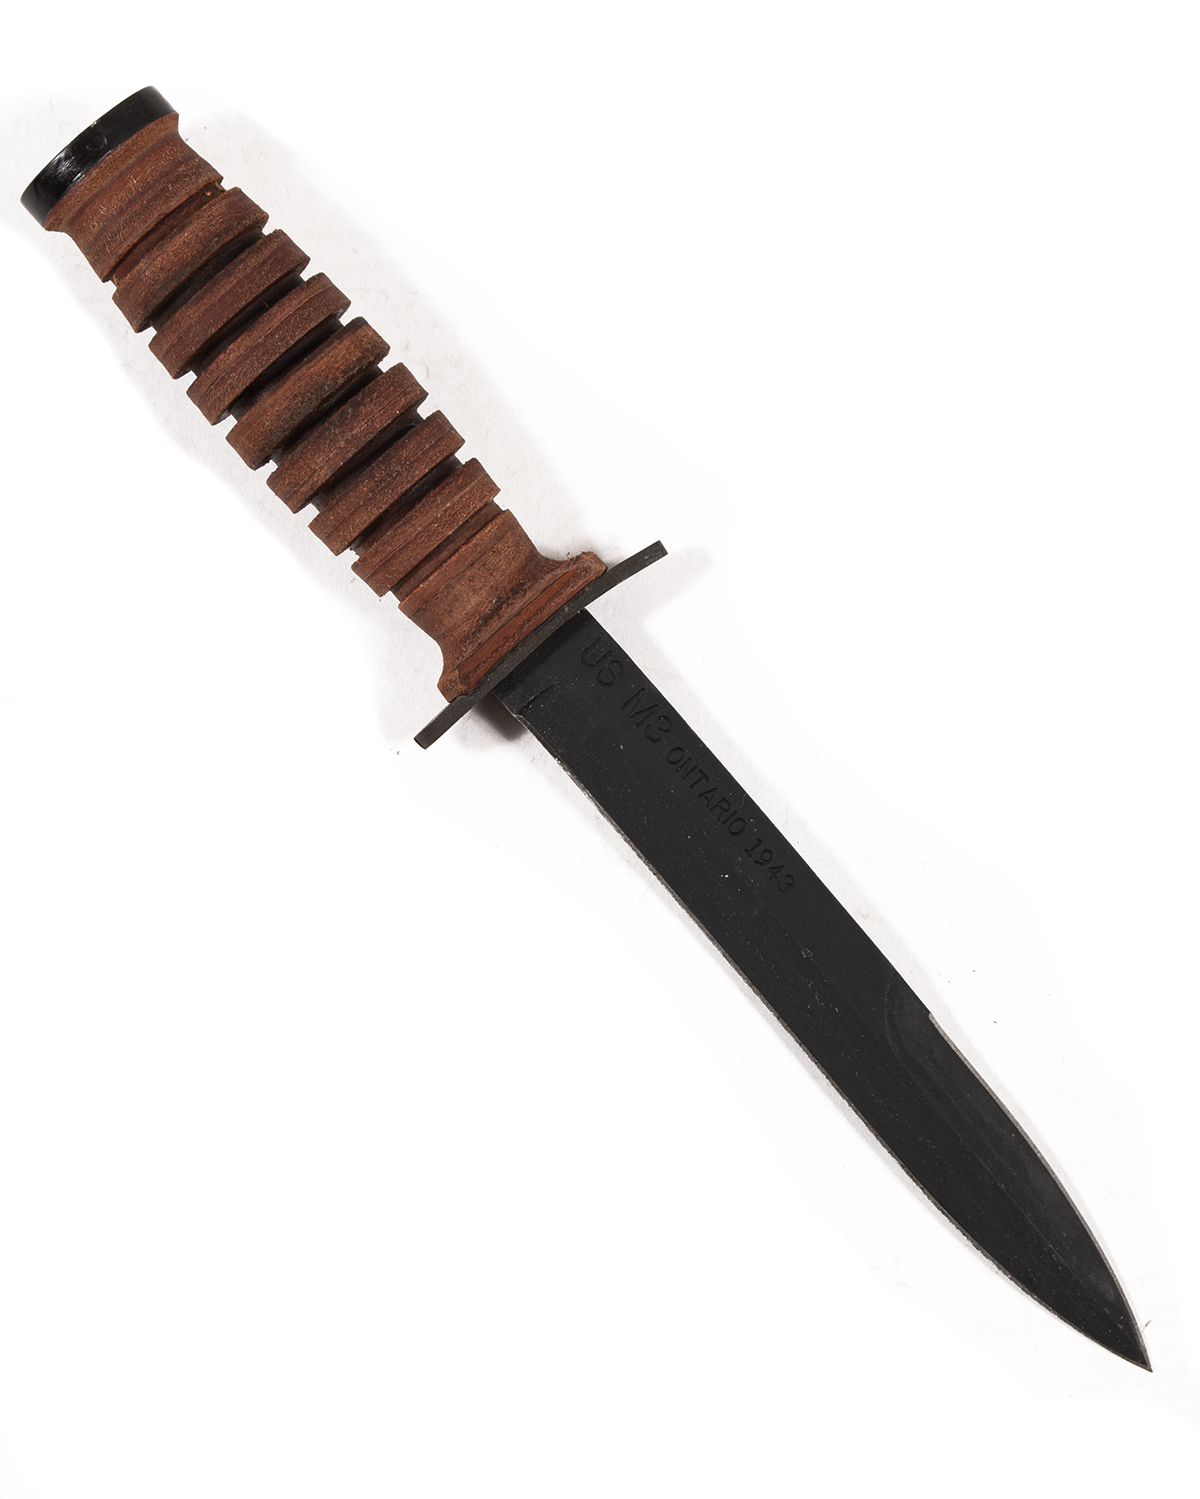 M3 Trench Knife Buy M3 Knife Online At The Front